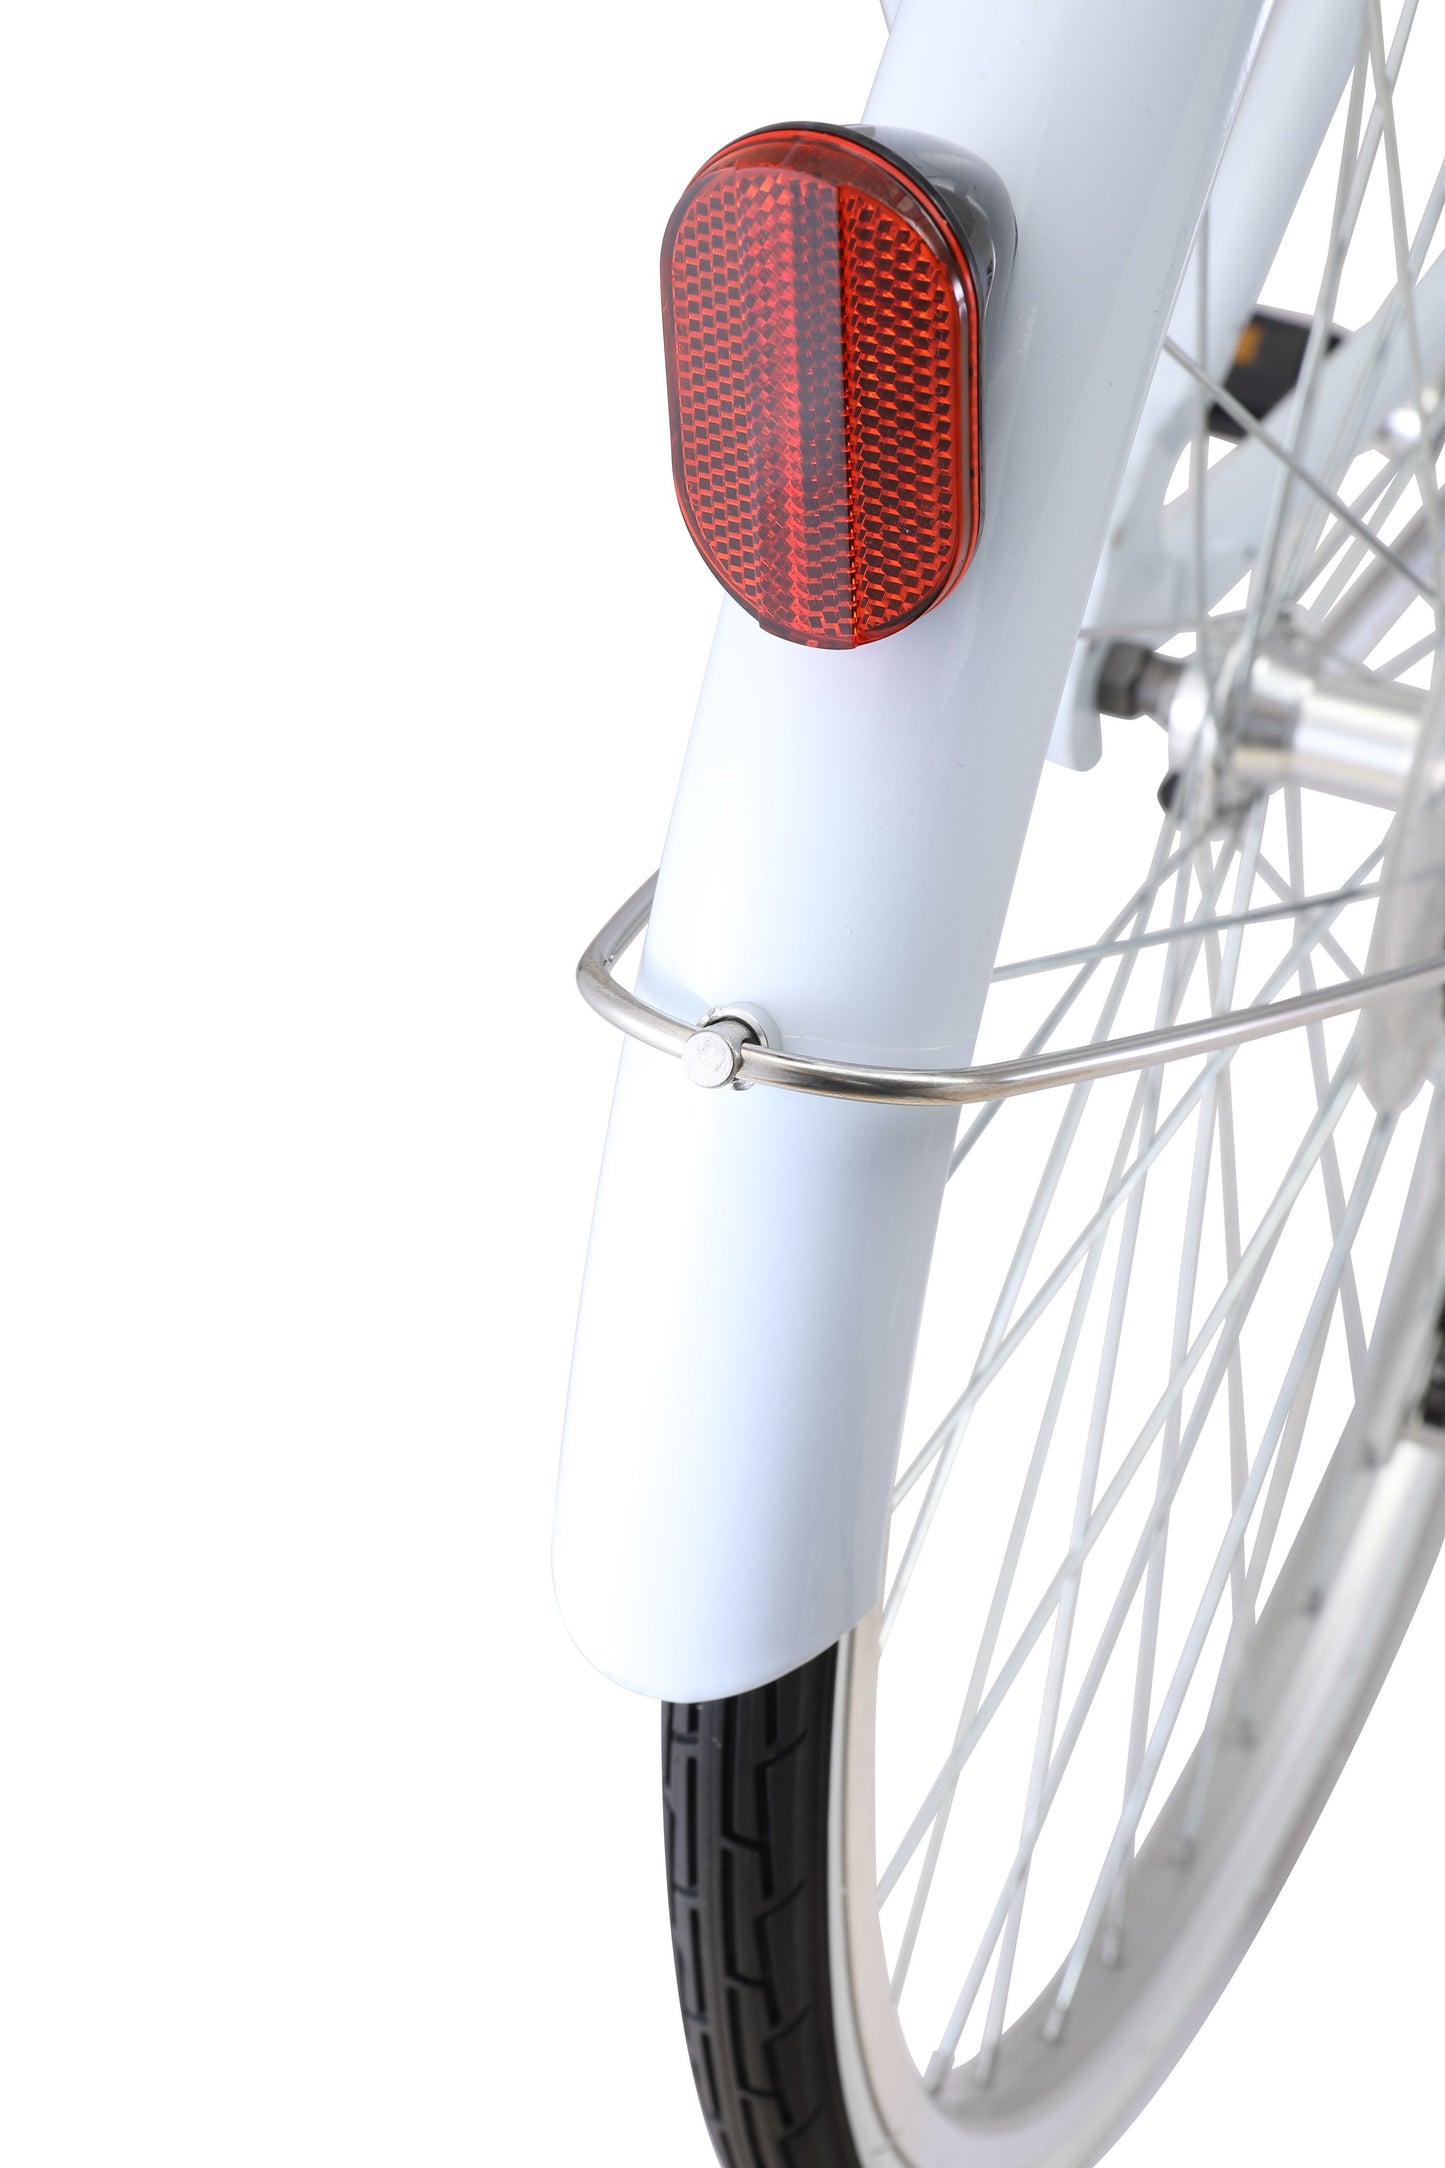 Ladies Lite Vintage Bike in white showing rear mudguard and tail reflecter from Reid Cycles Australia